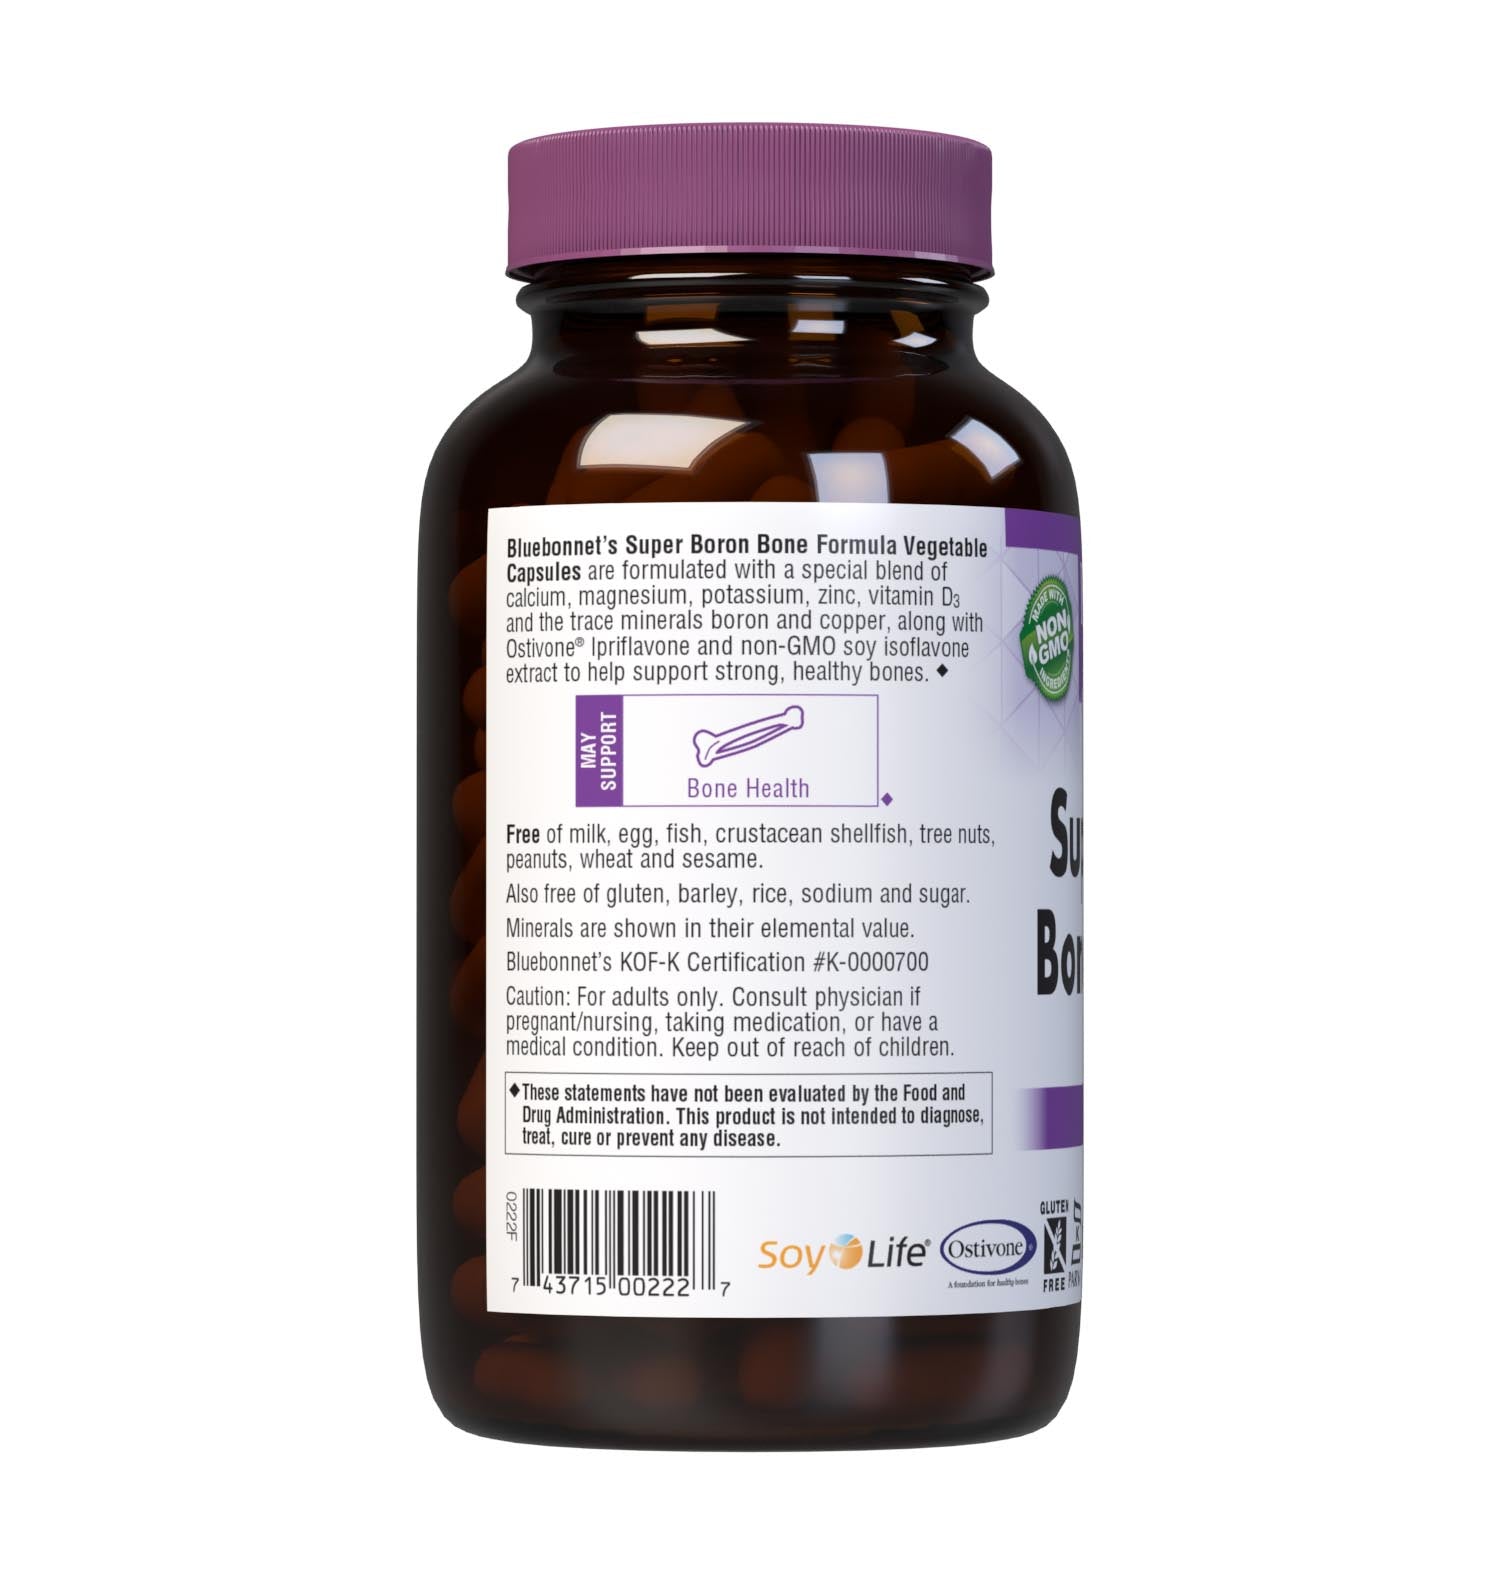 Bluebonnet’s Super Boron Bone Formula 240 Vegetable Capsules are formulated with a special blend of calcium, magnesium, potassium, zinc, vitamin D3 and the trace minerals copper. Also formulated with at supplies the soy isoflavones Genistein, Genistein, Daidzein, Daidzin, Glycitein and Glycitin. Description panel. #size_240 count